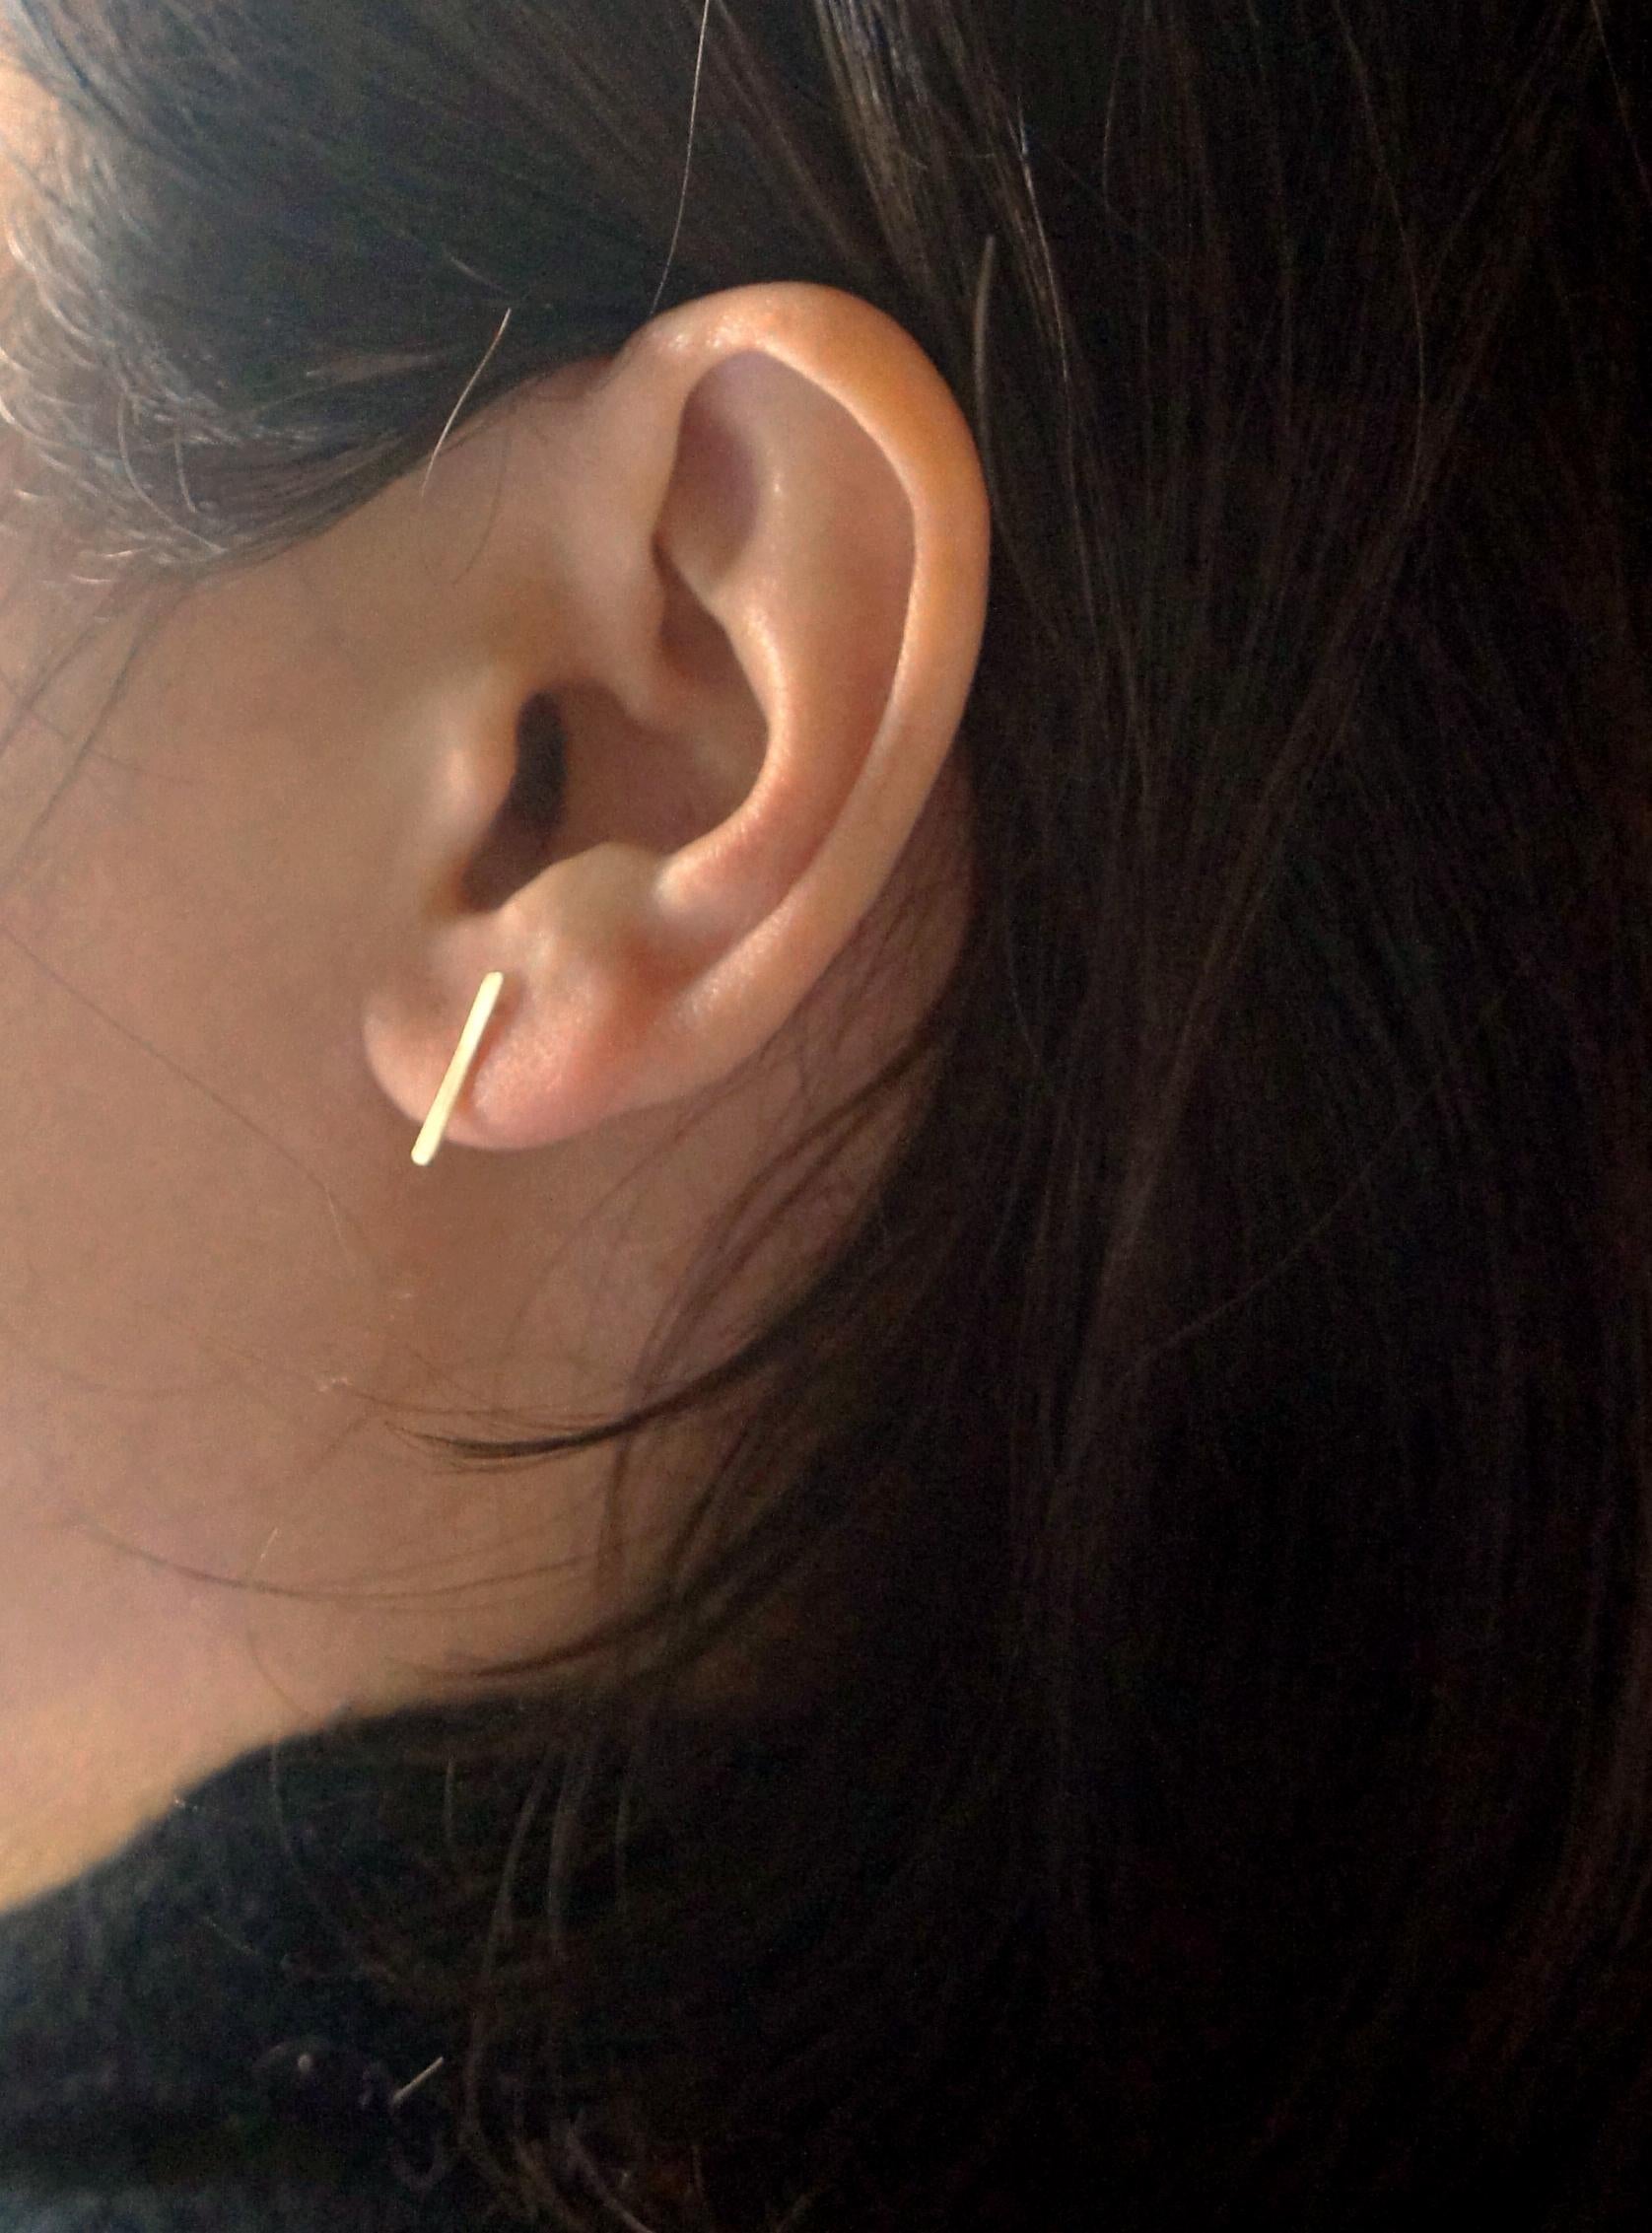 The Detail
Making Marks 18-karat yellow gold studs. 
Making Marks is a collection with maker's hand Forging marks and brushed texture.
Minimal and playful collection is perfect for everyday wears and nice gifts choices. 
These earrings come as a